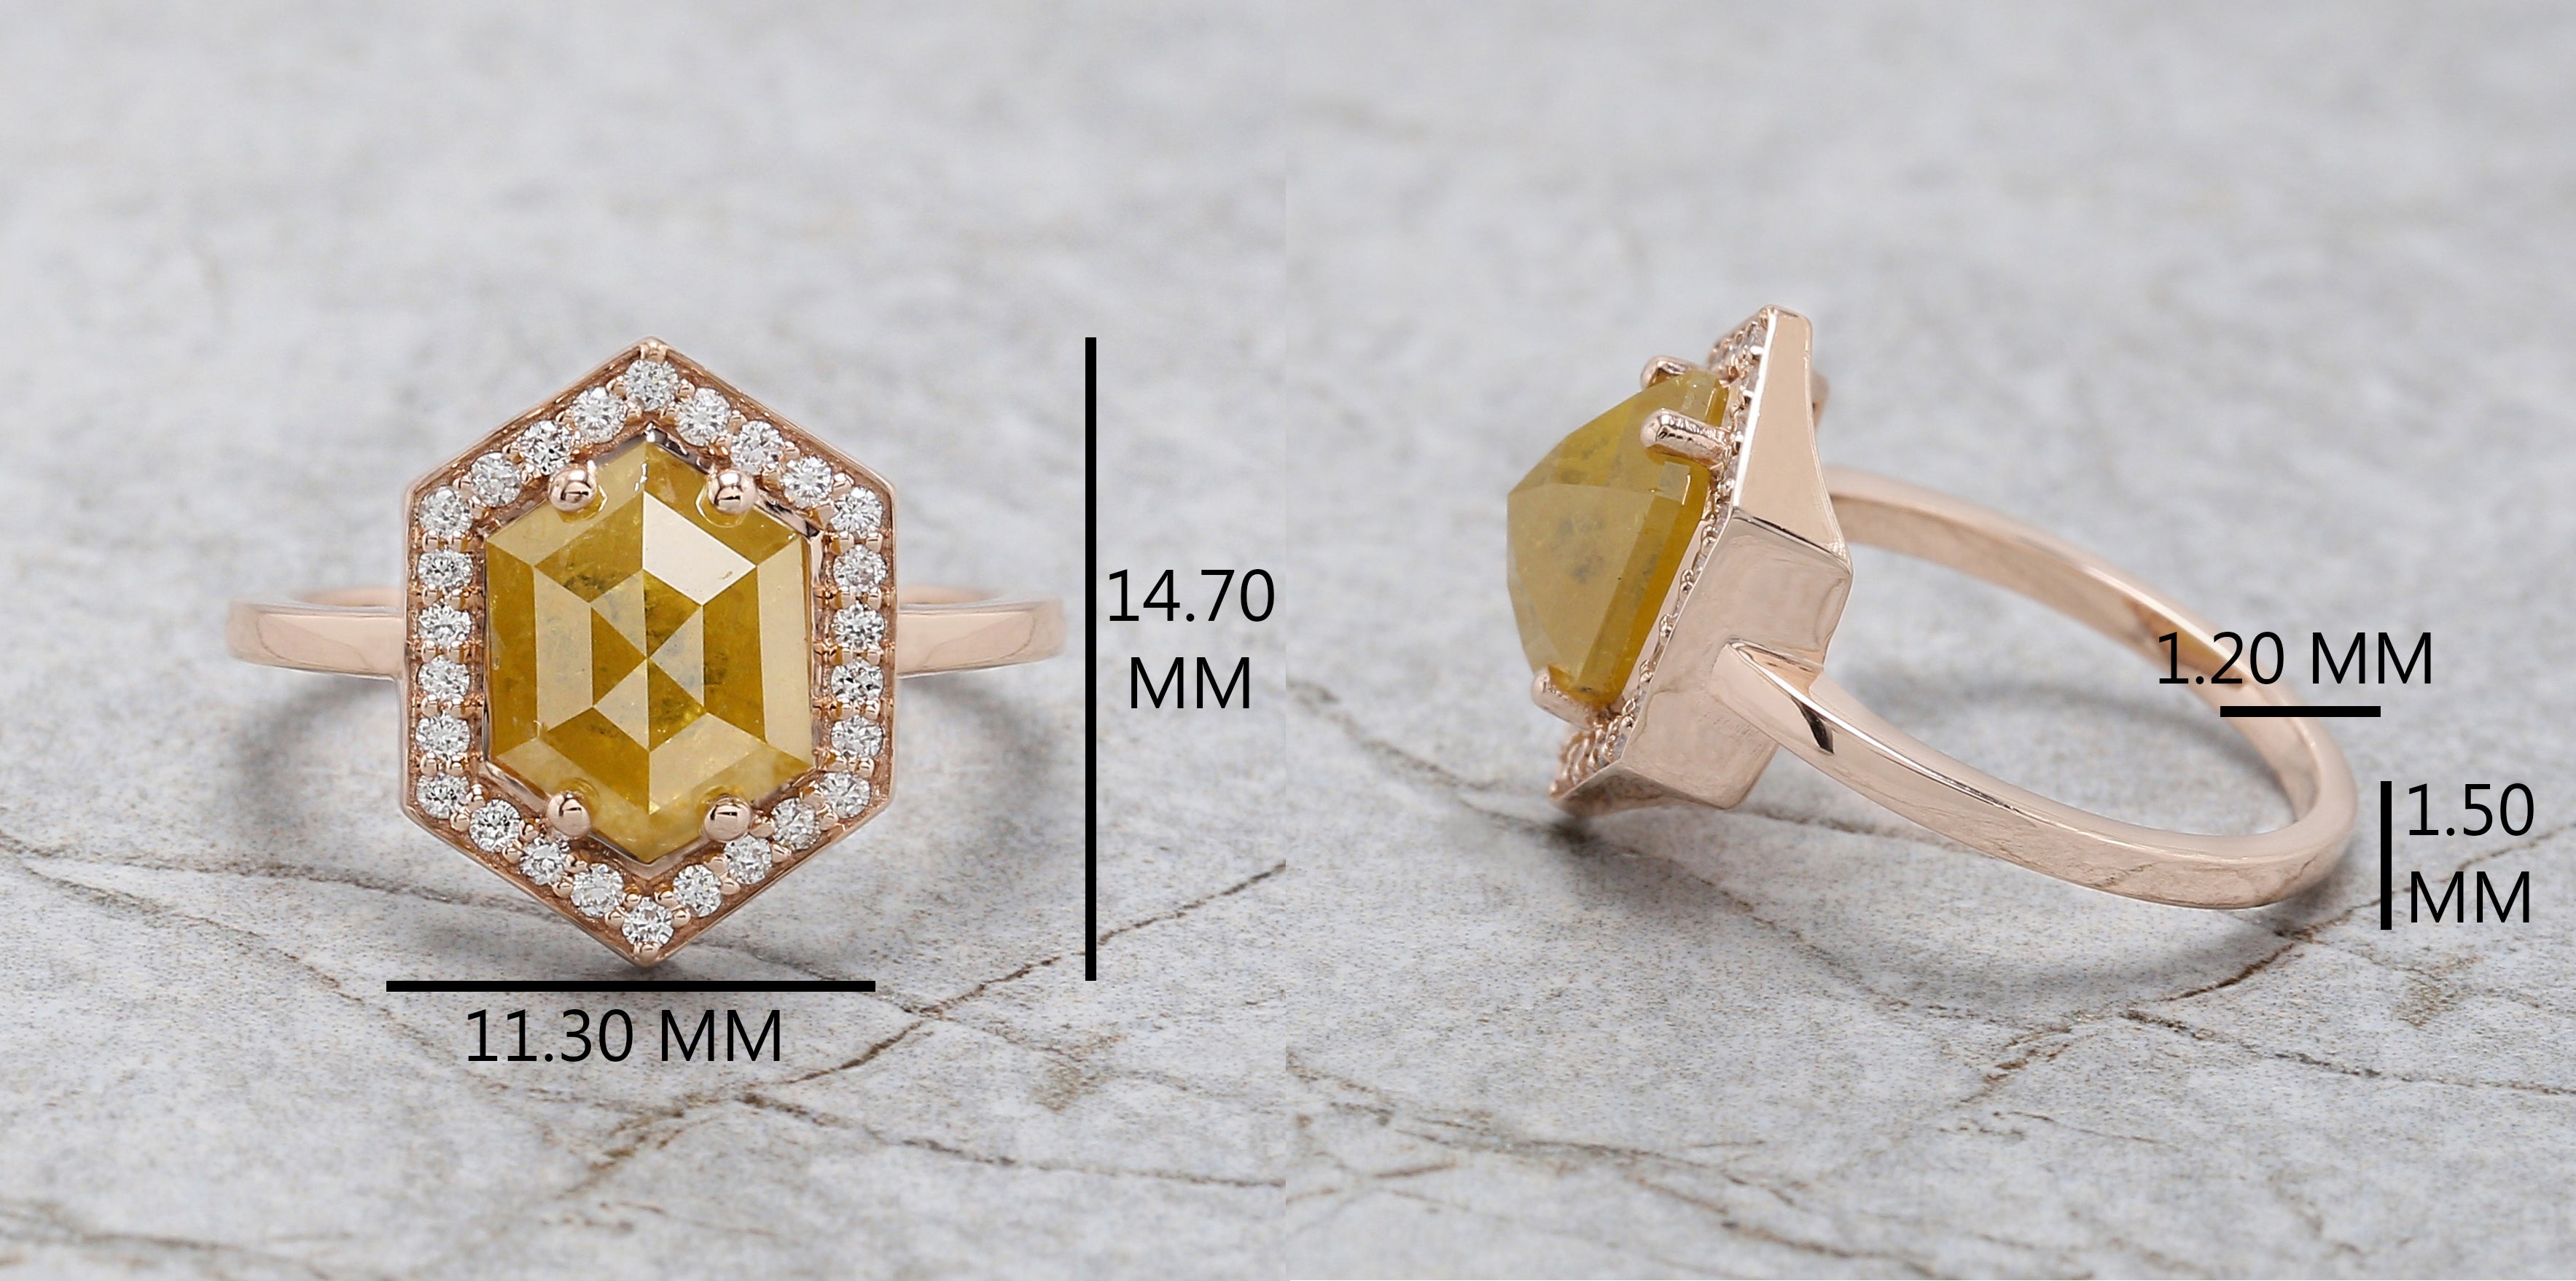 Hexagon Cut Yellow Color Diamond Ring 2.48 Ct 9.45 MM Hexagon Cut Diamond Ring 14K Rose Gold Silver Engagement Ring Gift For Her QL3022